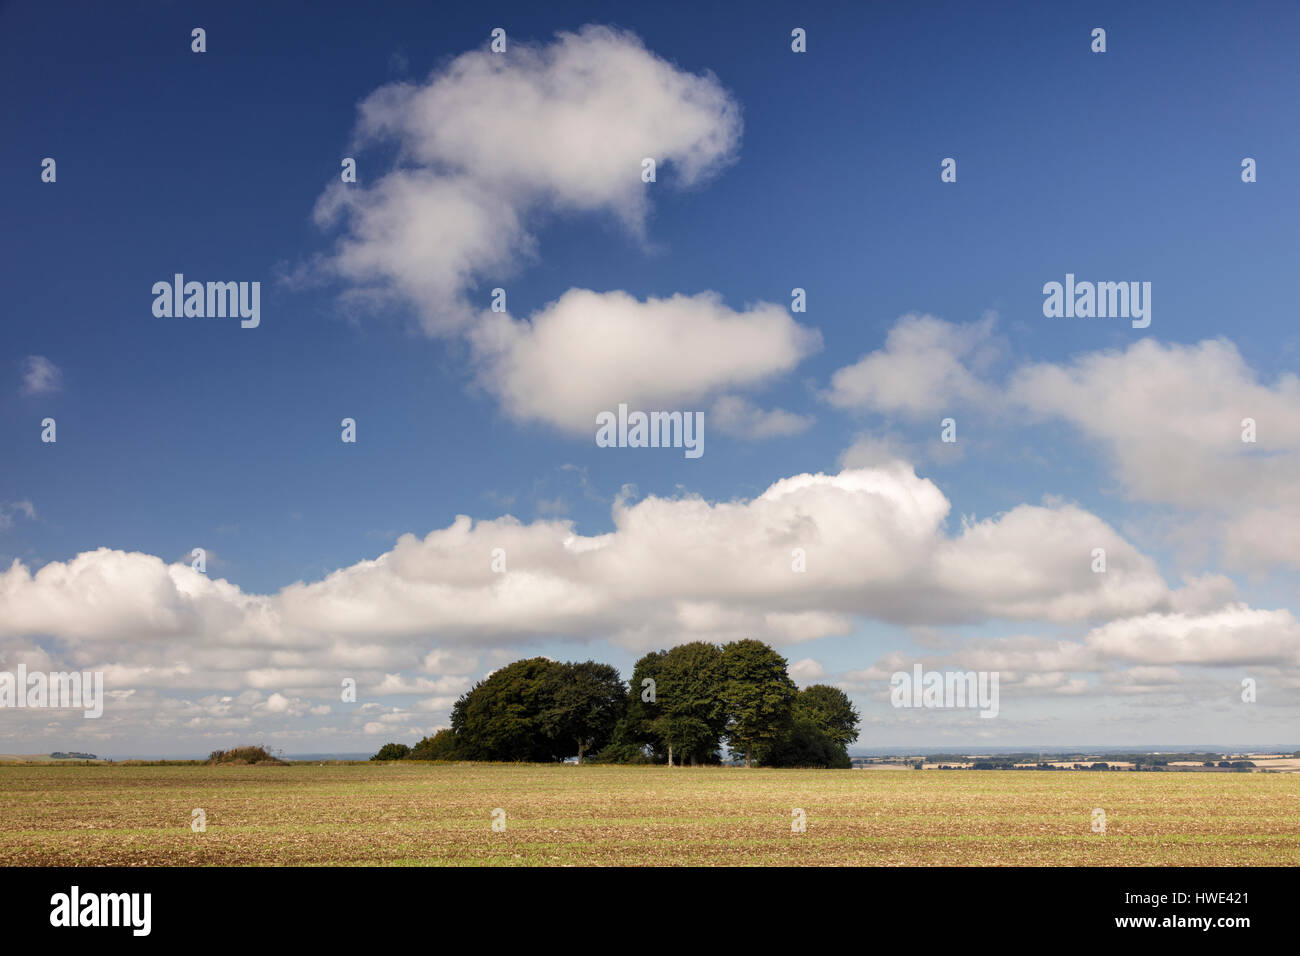 Clump of trees near the Ridgeway National Trail in Wiltshire. A cloud above the trees in in the shape of the letter C. Stock Photo